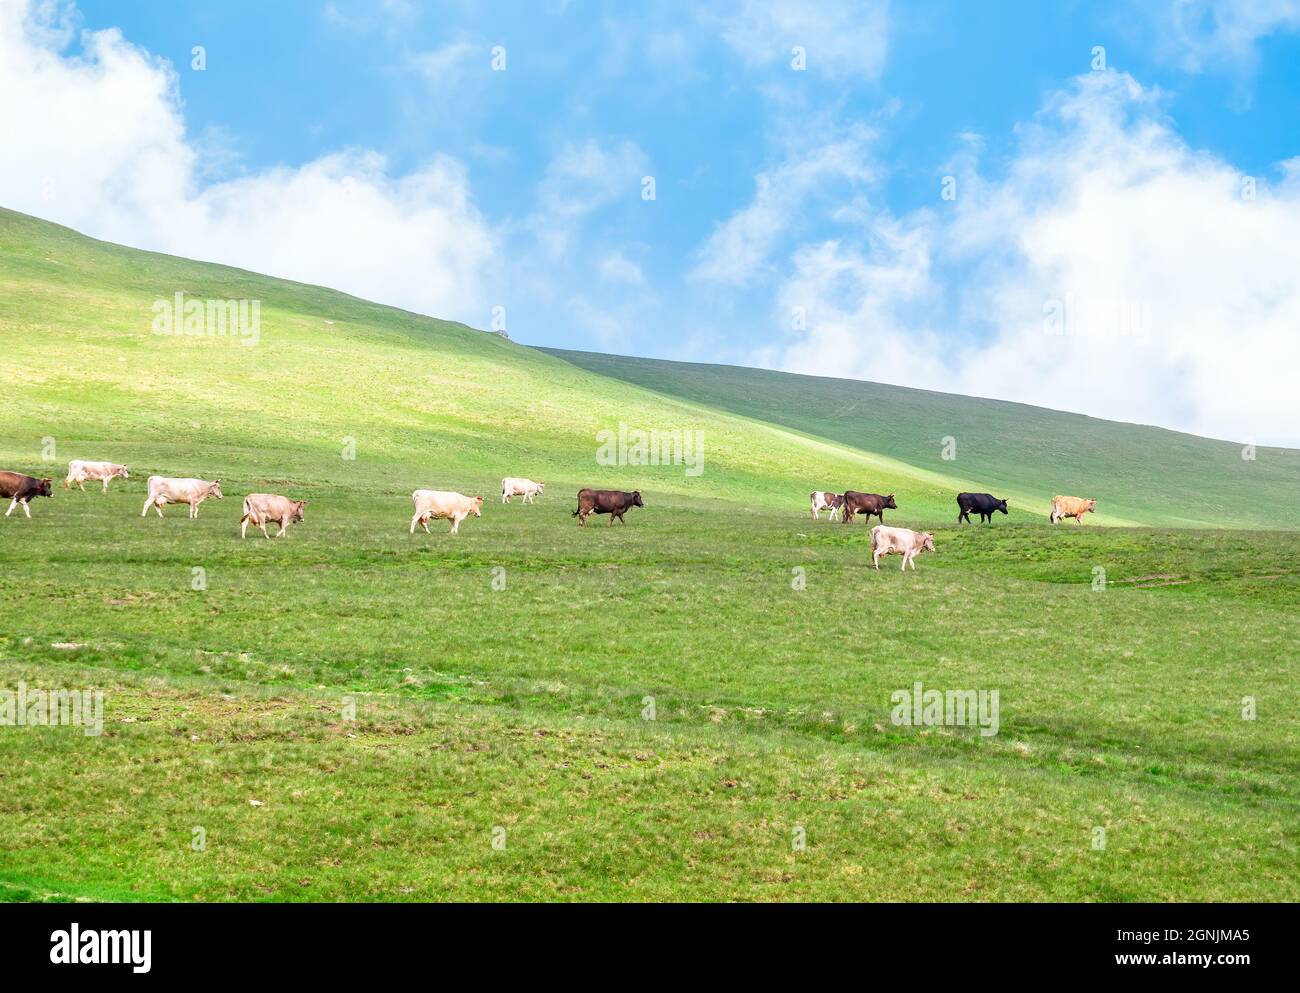 Cows grazing on the fresh green grass meadows or pasture in Bucegi Mountains ( Carpathian Moutains), Romania. Idyllic rustic landscape Stock Photo